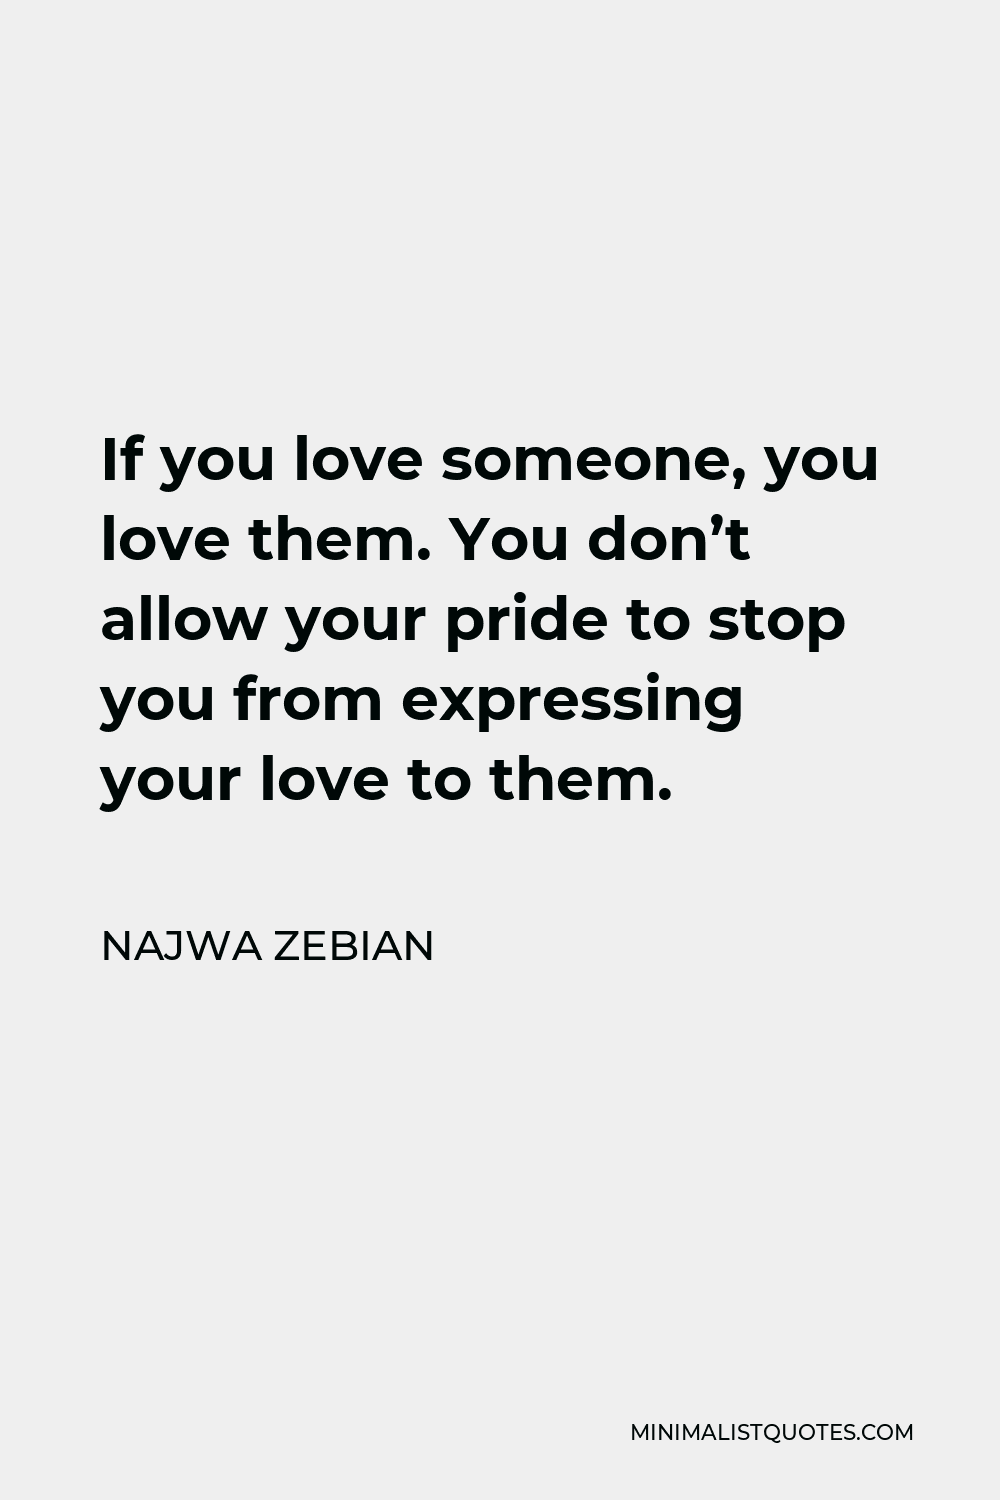 Najwa Zebian Quote - If you love someone, you love them. You don’t allow your pride to stop you from expressing your love to them.